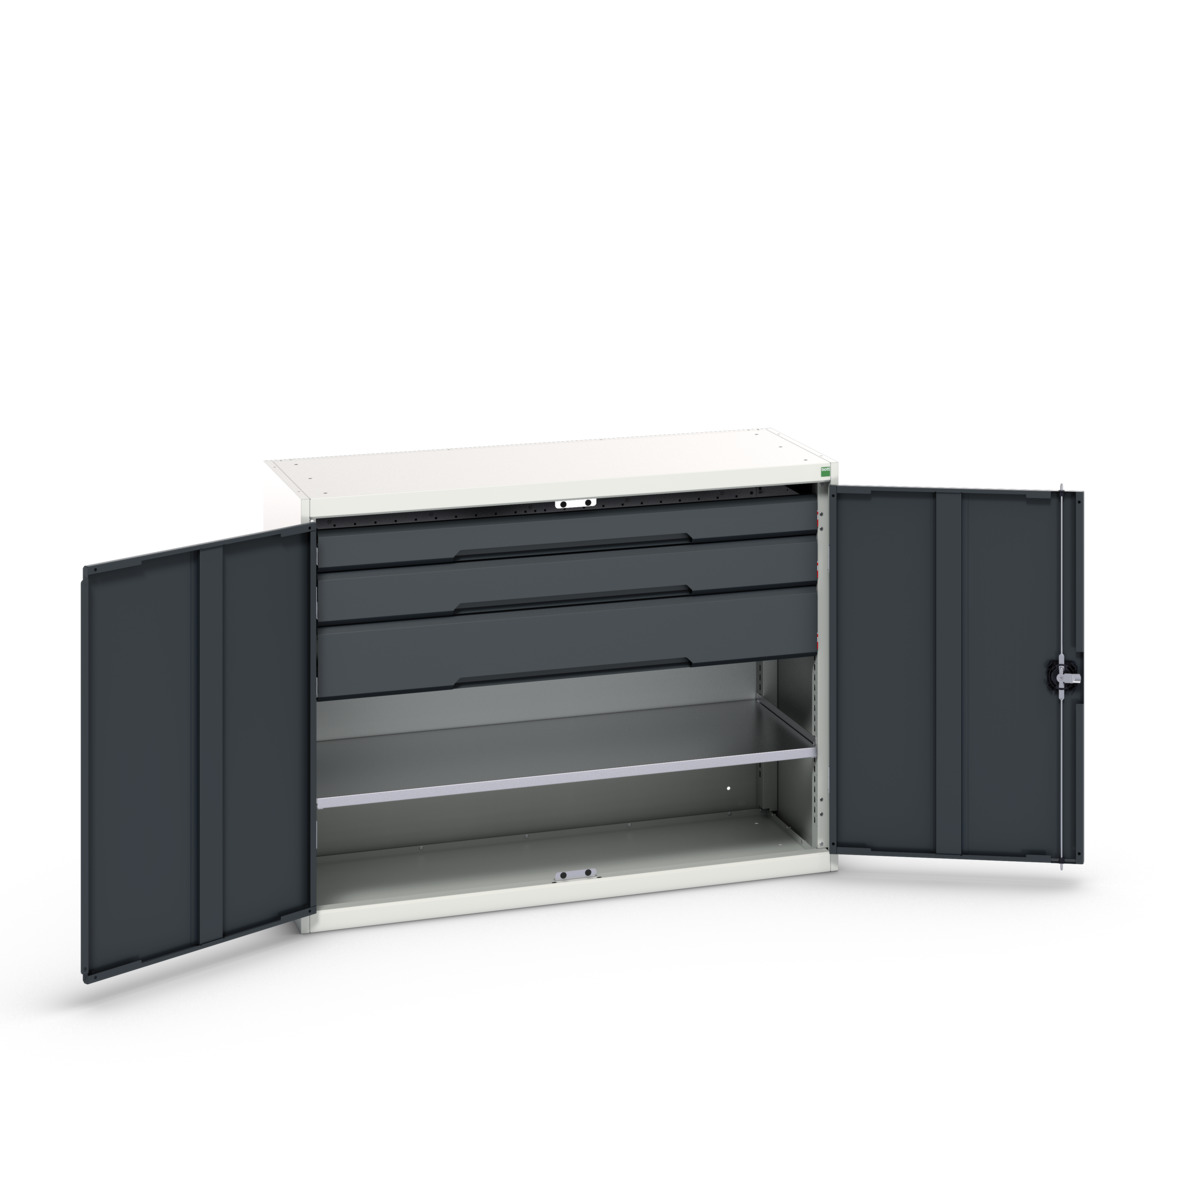 16926607. - verso kitted cupboard